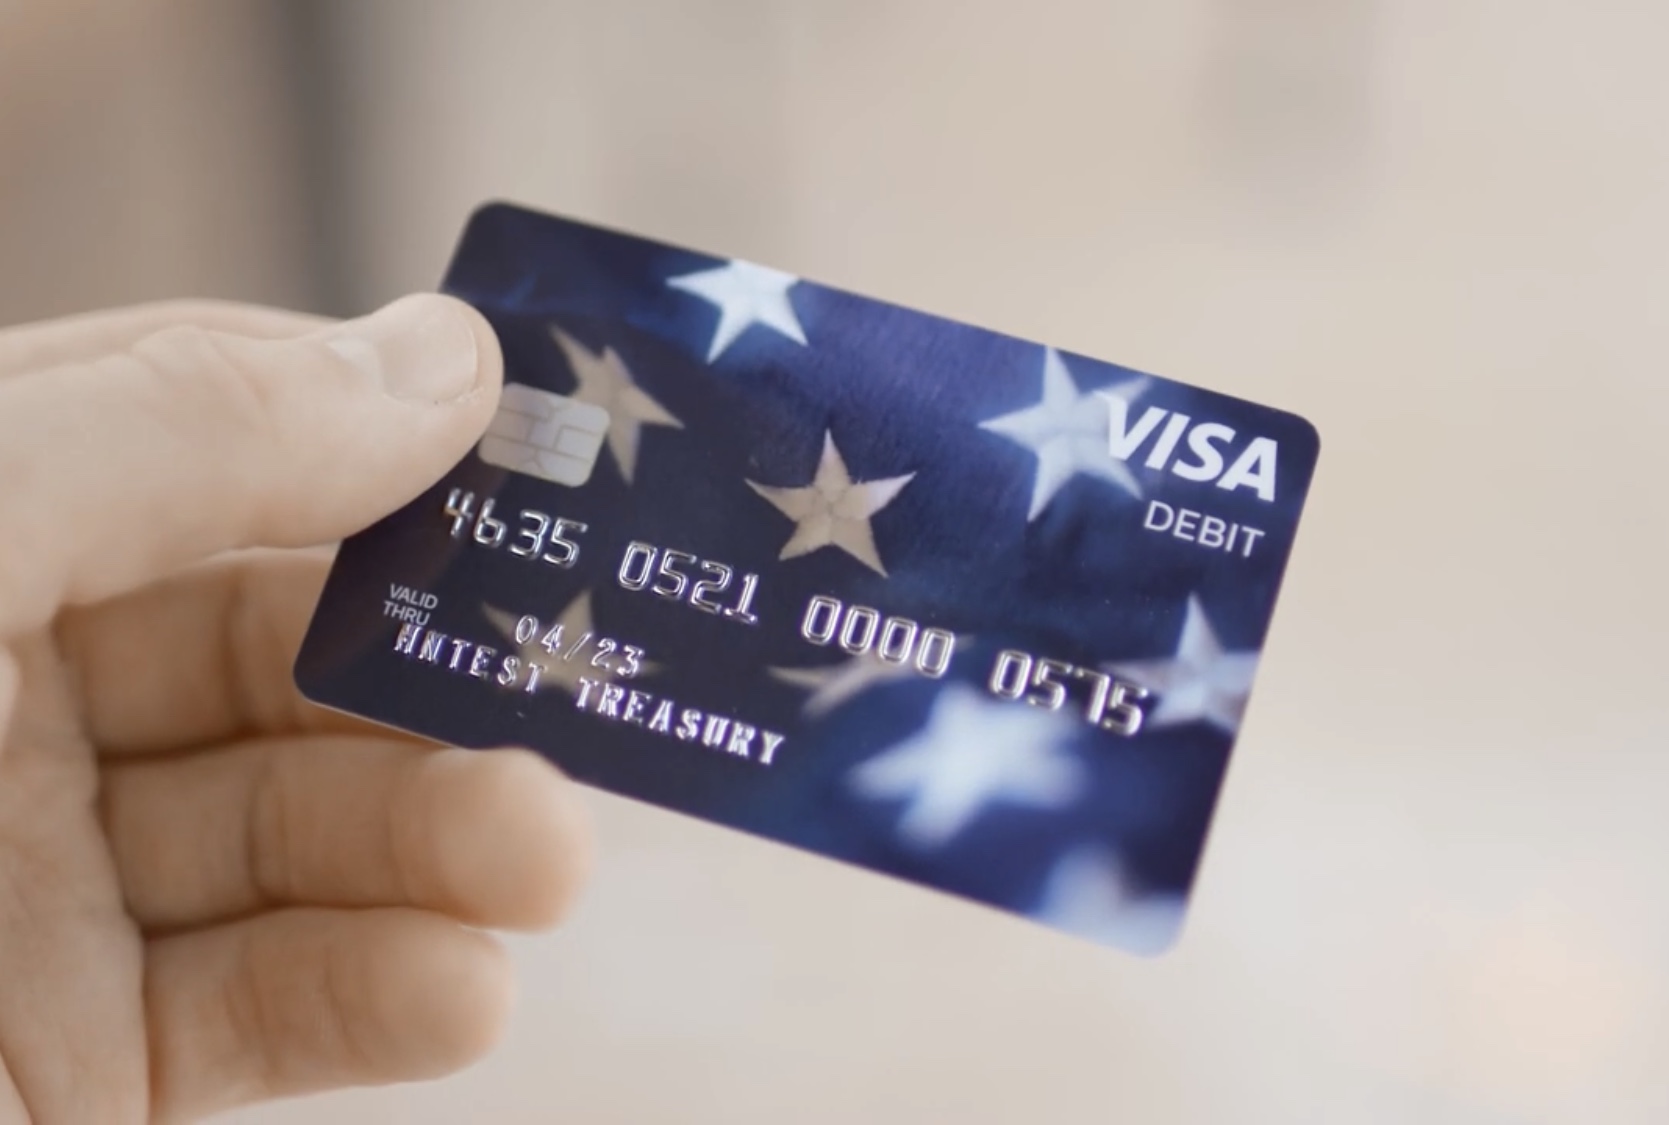 You may get your stimulus payment on a prepaid VISA card in the mail